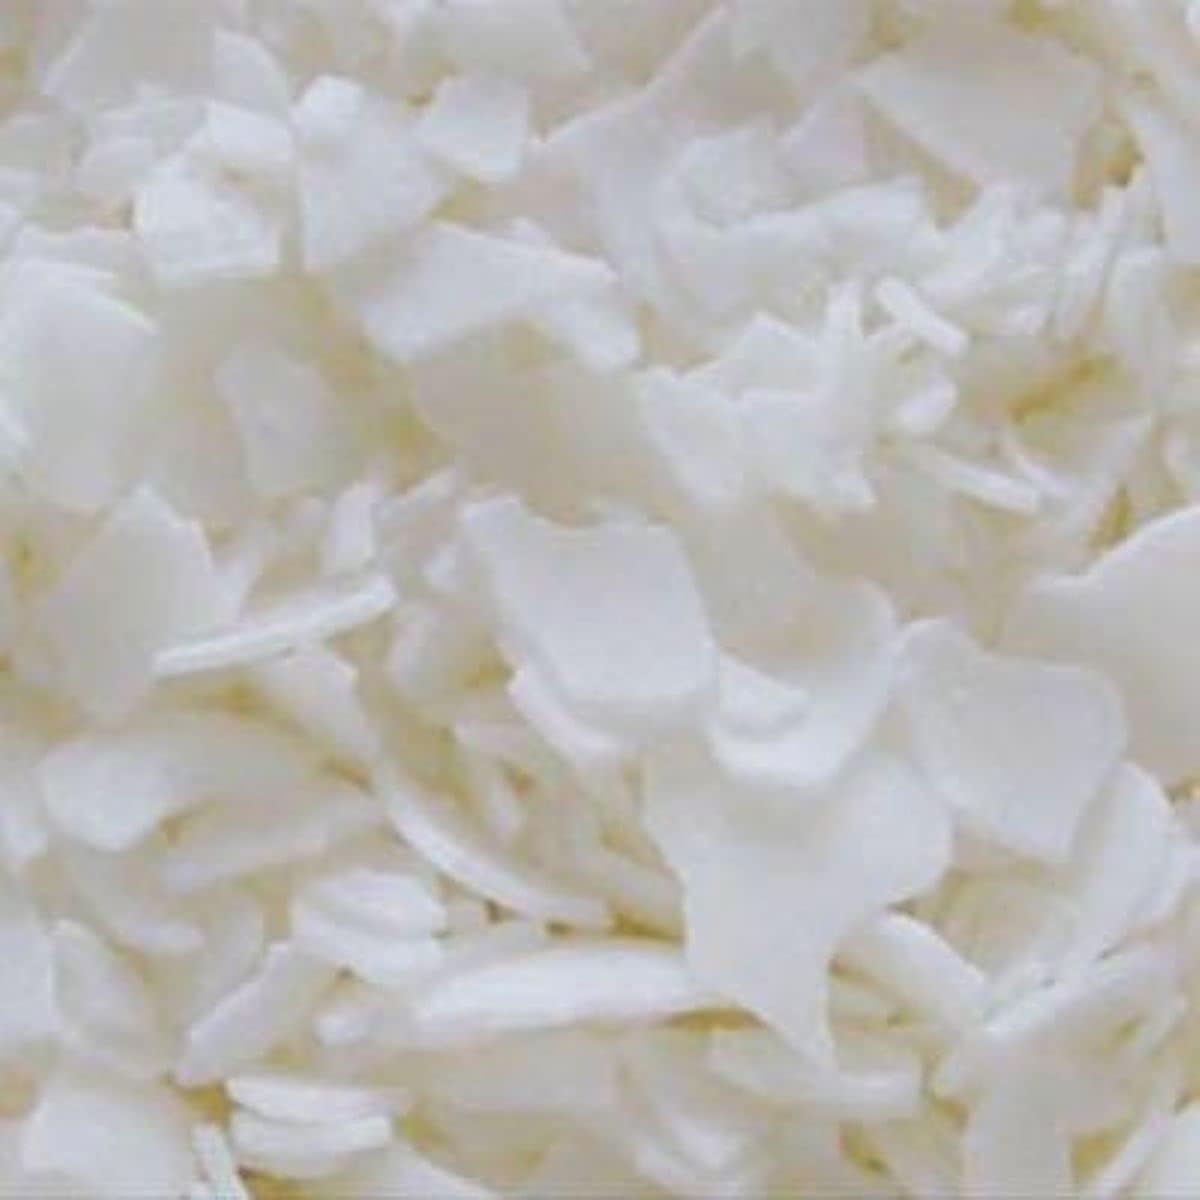 NatureWax C-1 Soy Flakes - 5 LB - Great for Candles, Clamshell Tarts, Snap Bars and Wickless Candles